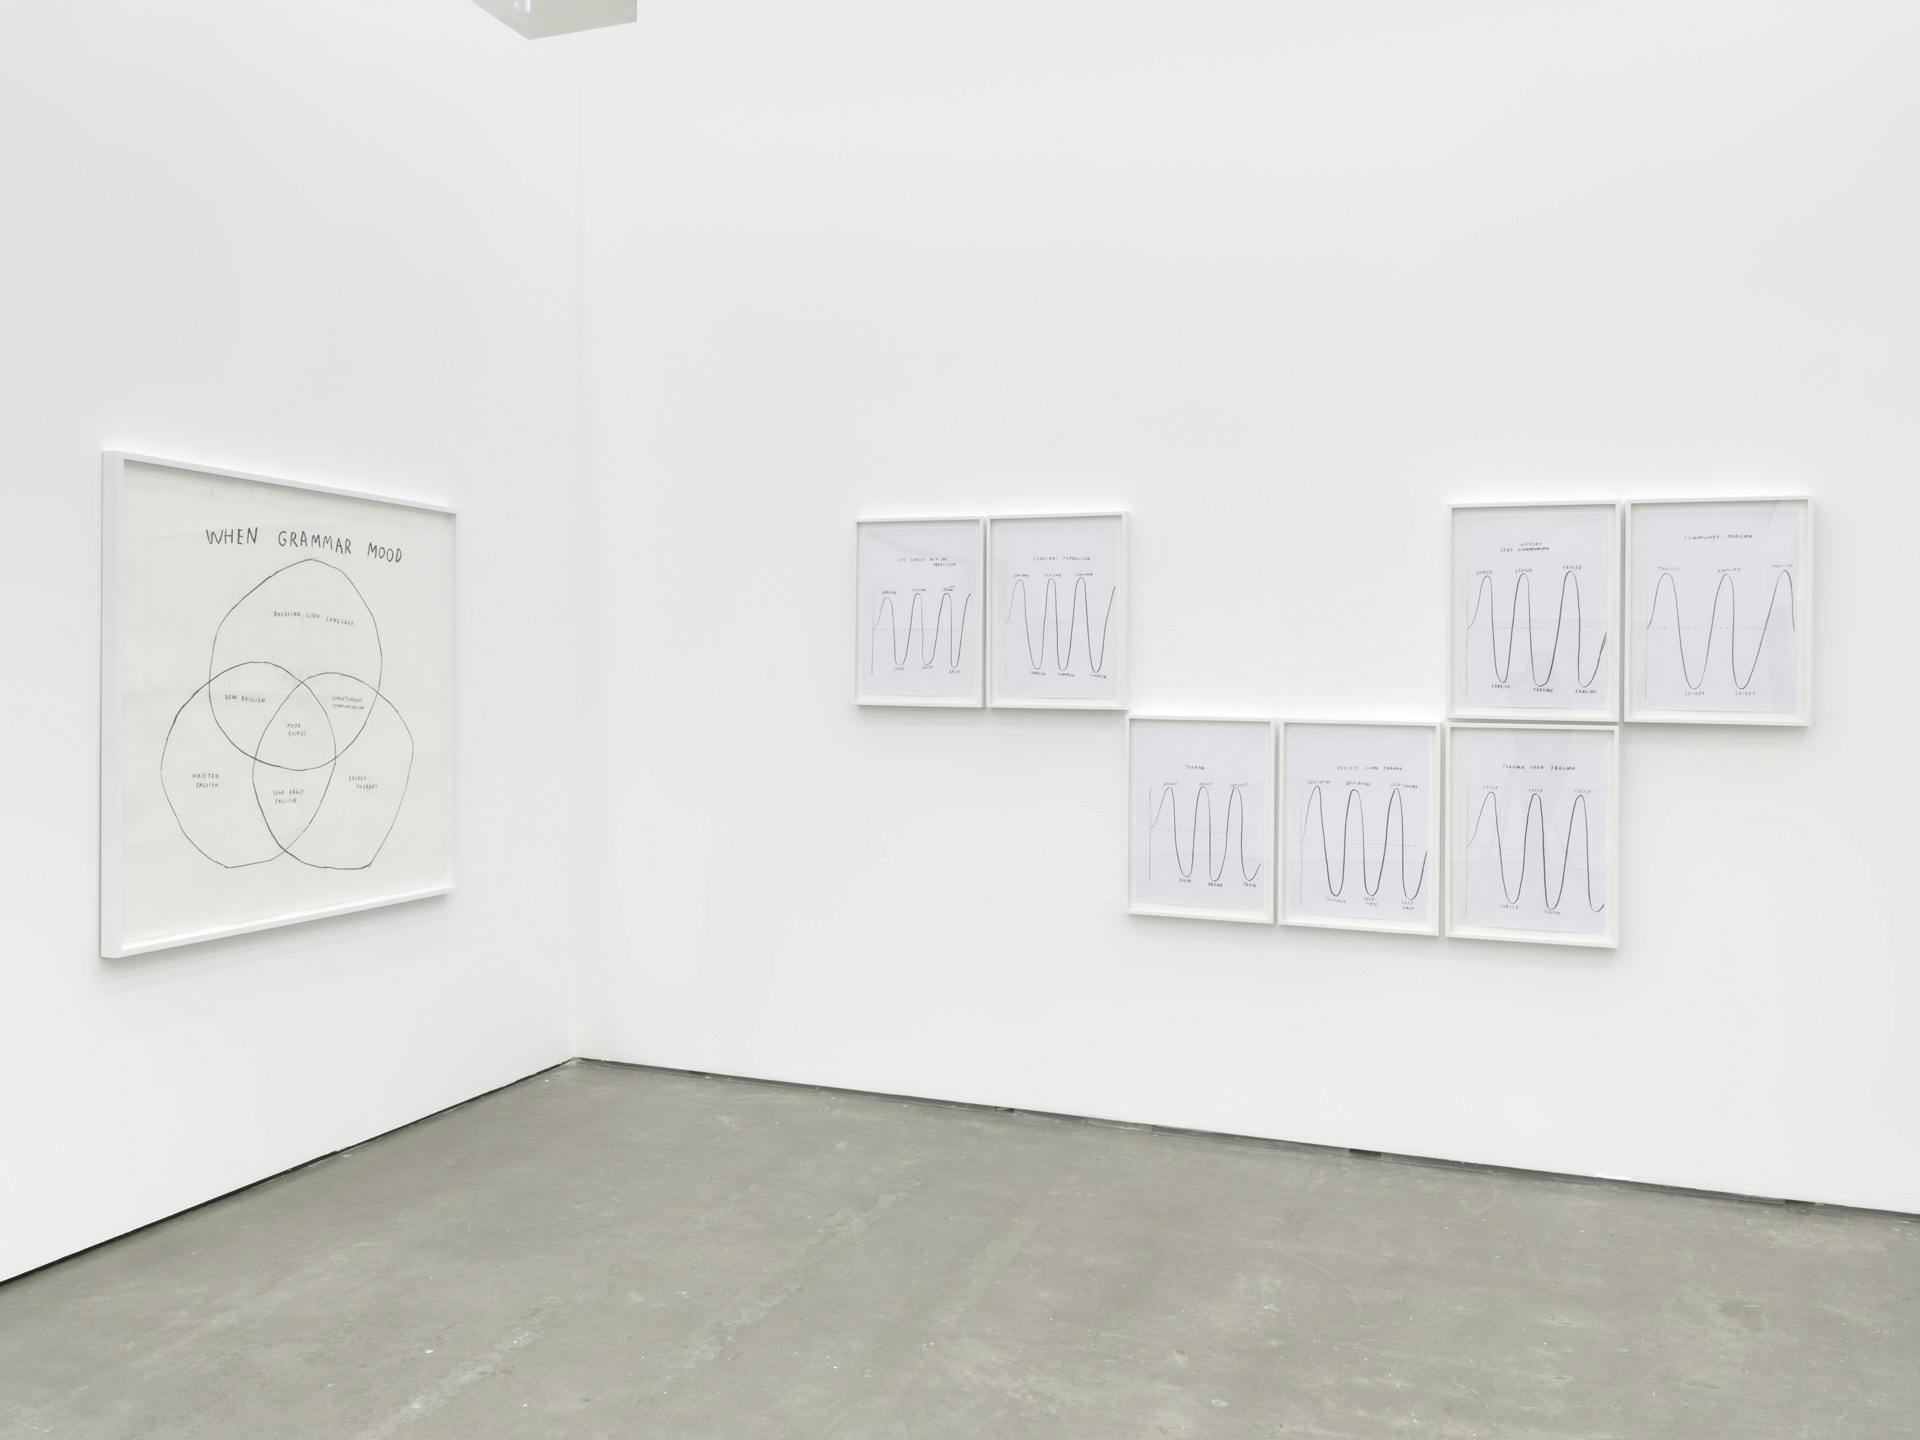 Seven small drawings by Christine Sun Kim depicting graphic notations arranged in a broken grid on a white wall, with a large drawing of a venn diagram on the adjoining wall to the left.